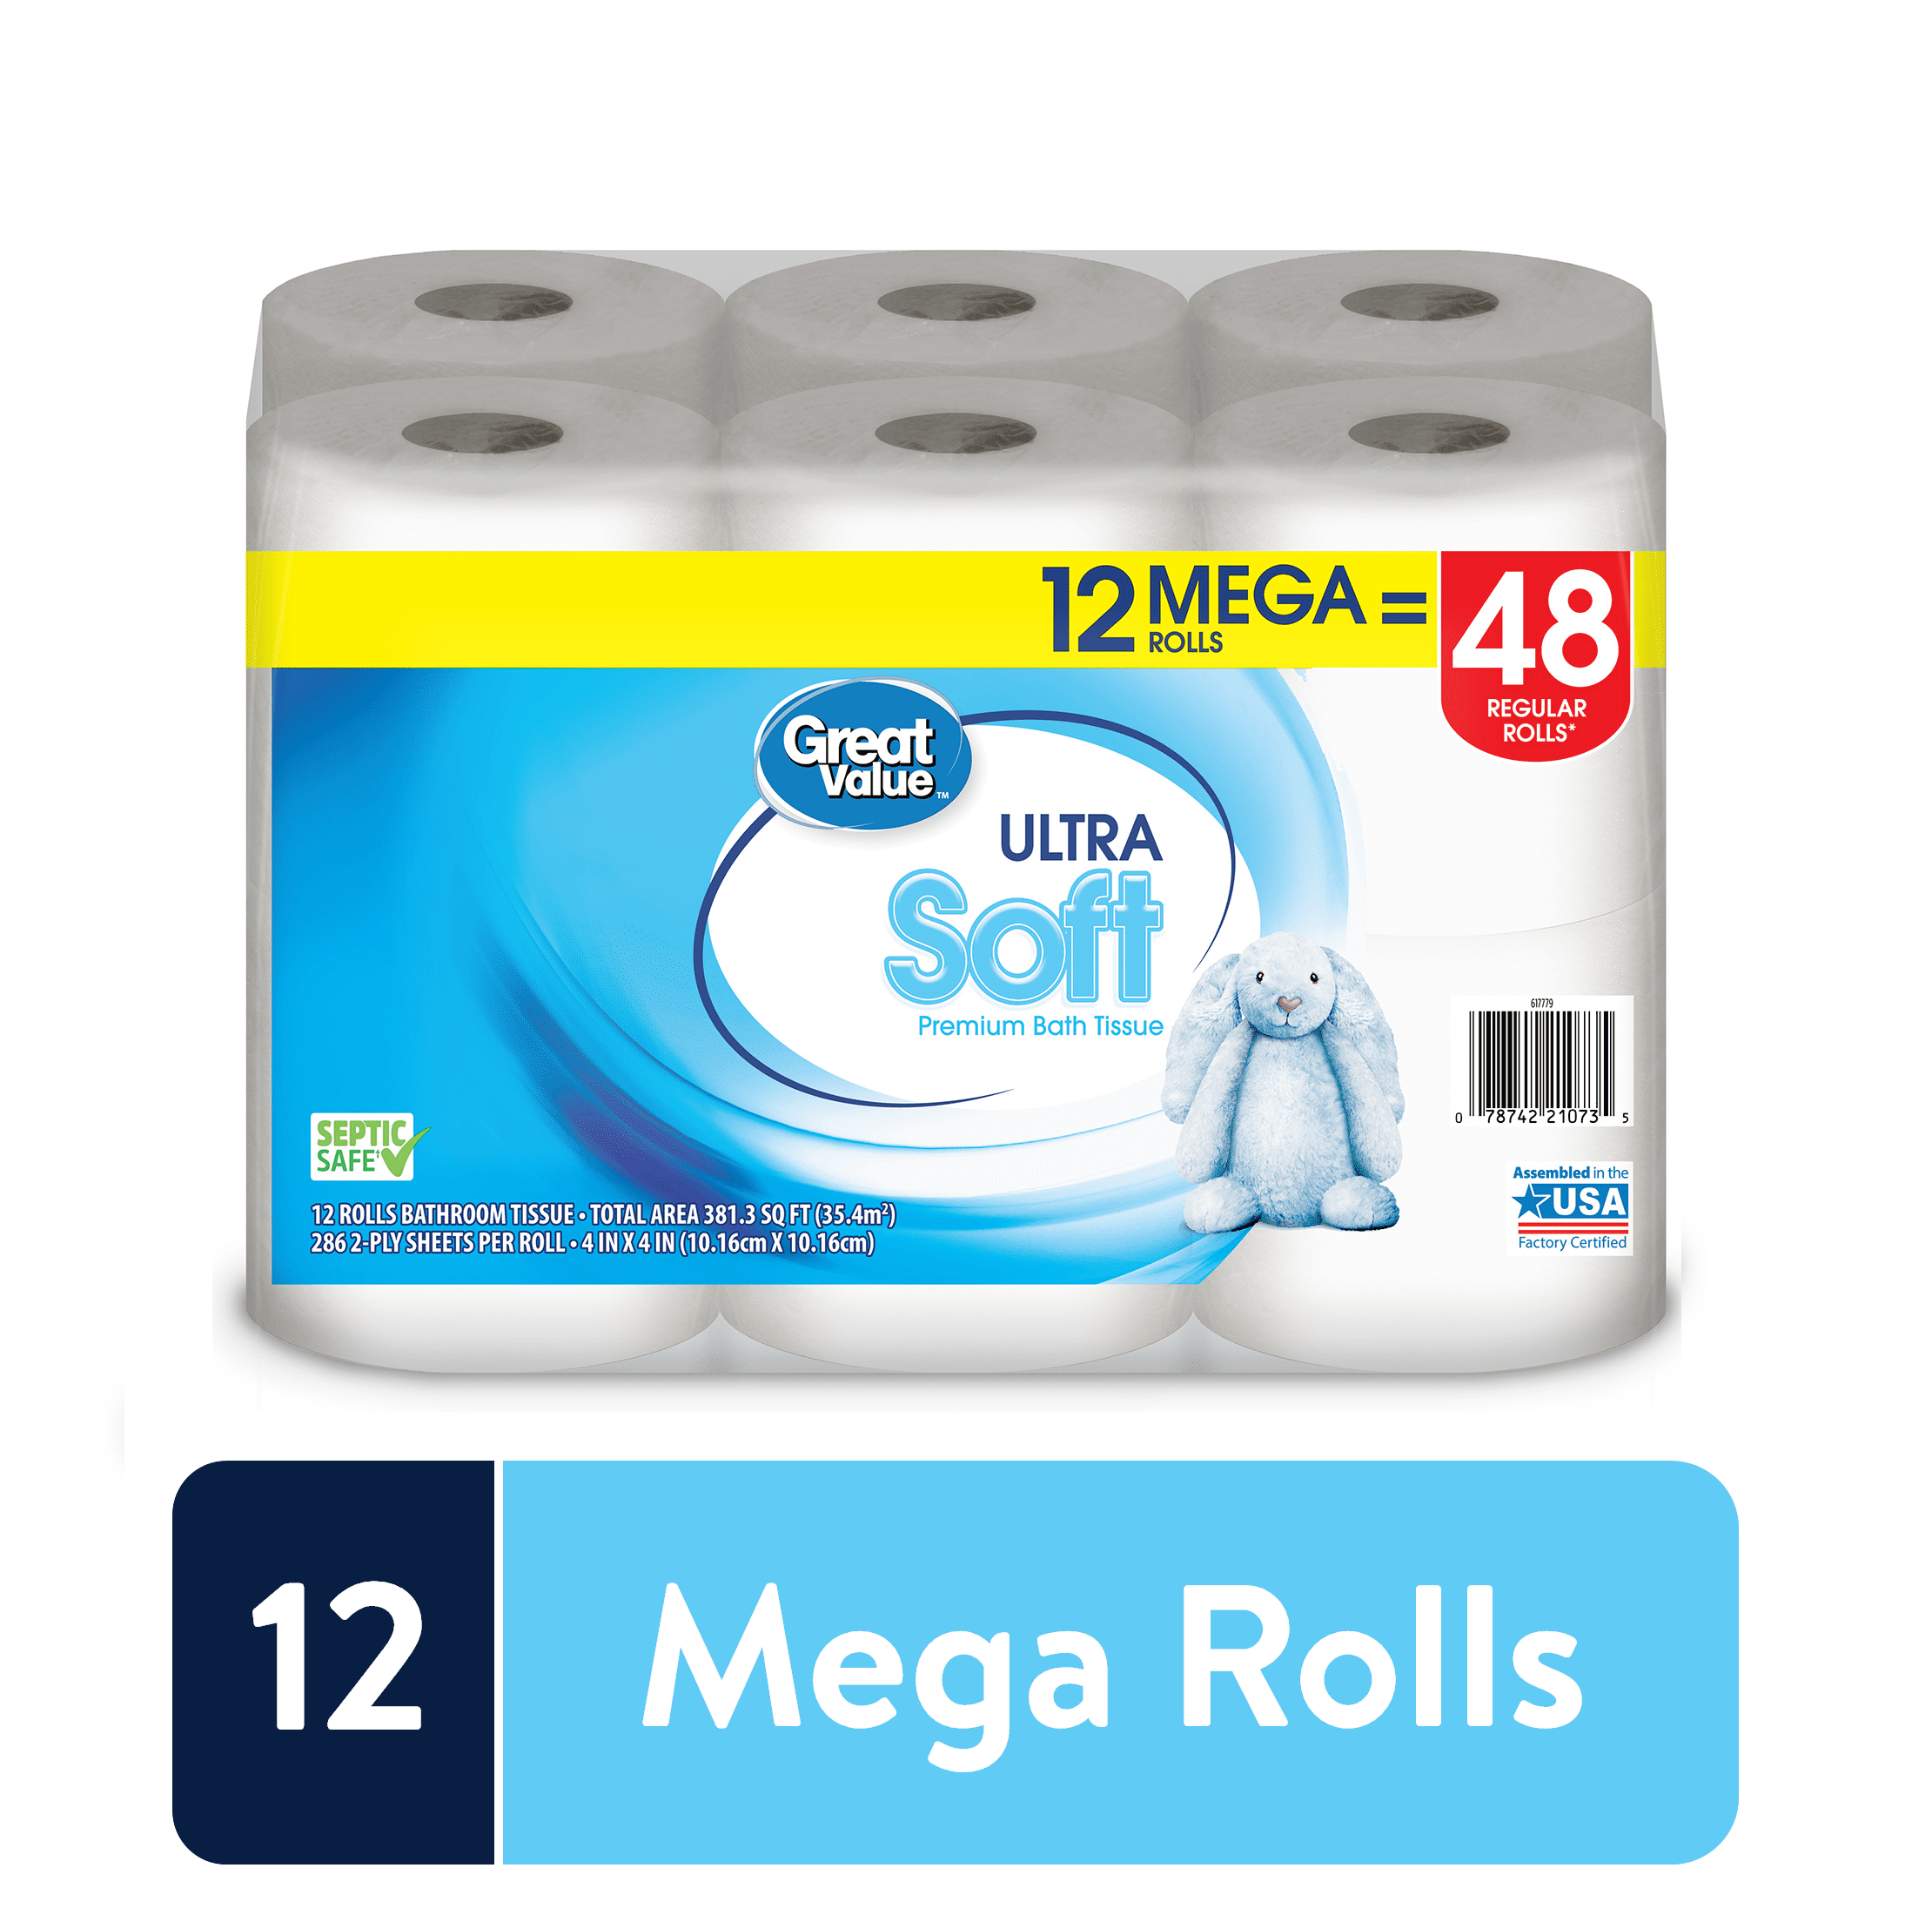 2-Ply 286 Sheeets Per Rol Details about   Great Value Ultra Strong Toilet Paper, 12 Mega Rolls 